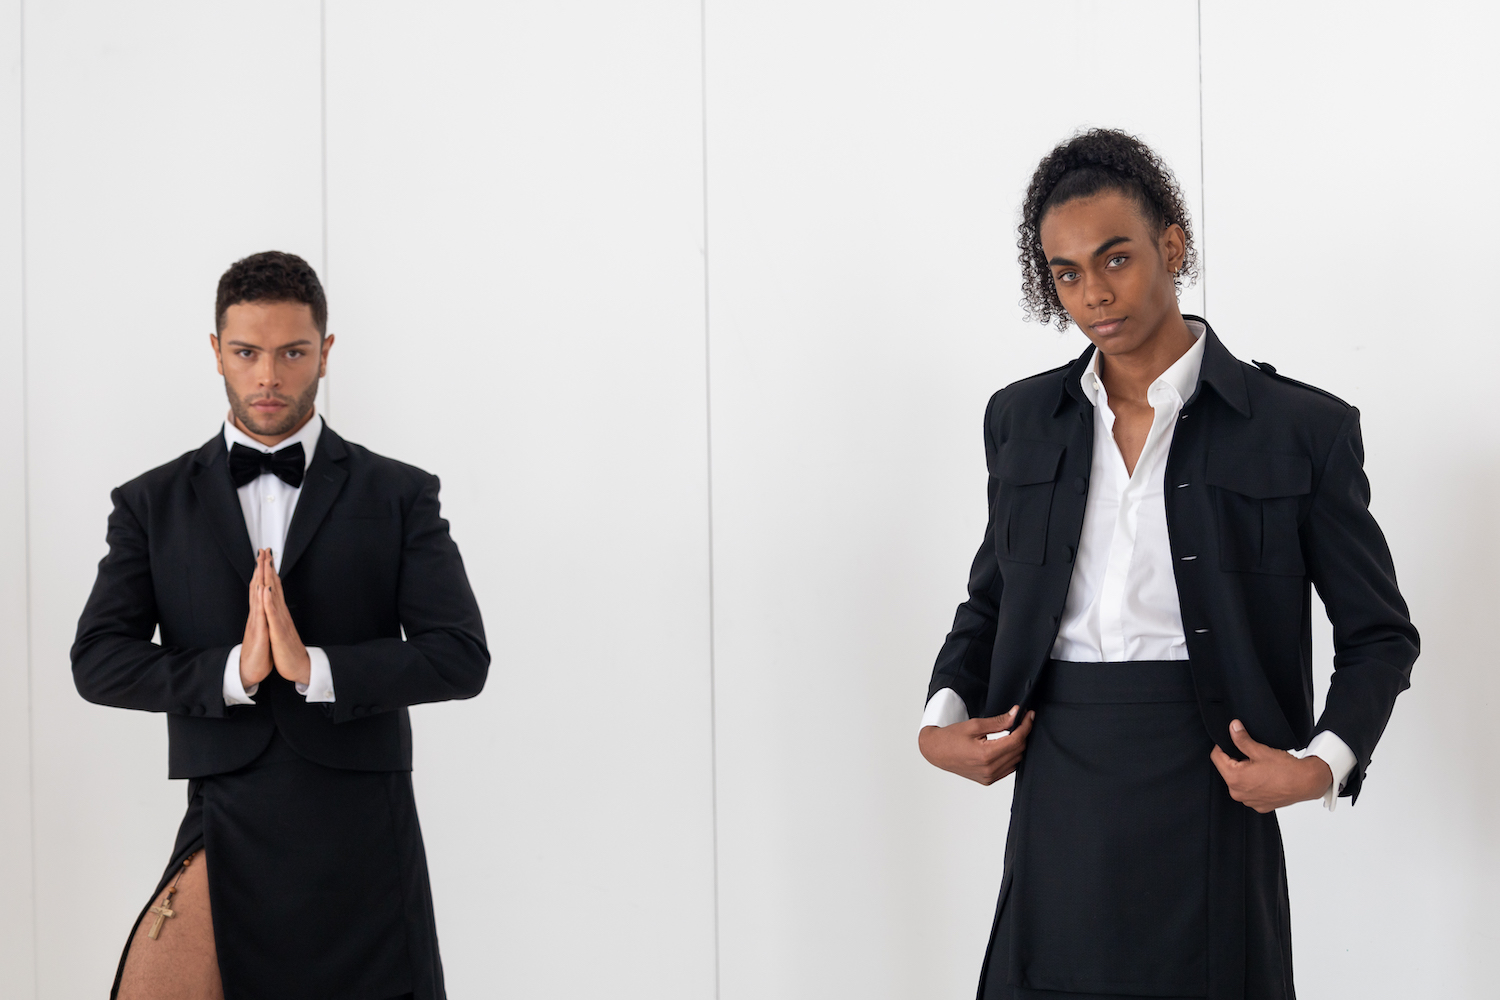 Two models wearing black blazers over white dress shirts pose together near a wall of the showroom. The models are wearing clothes from TERRY SINGH.